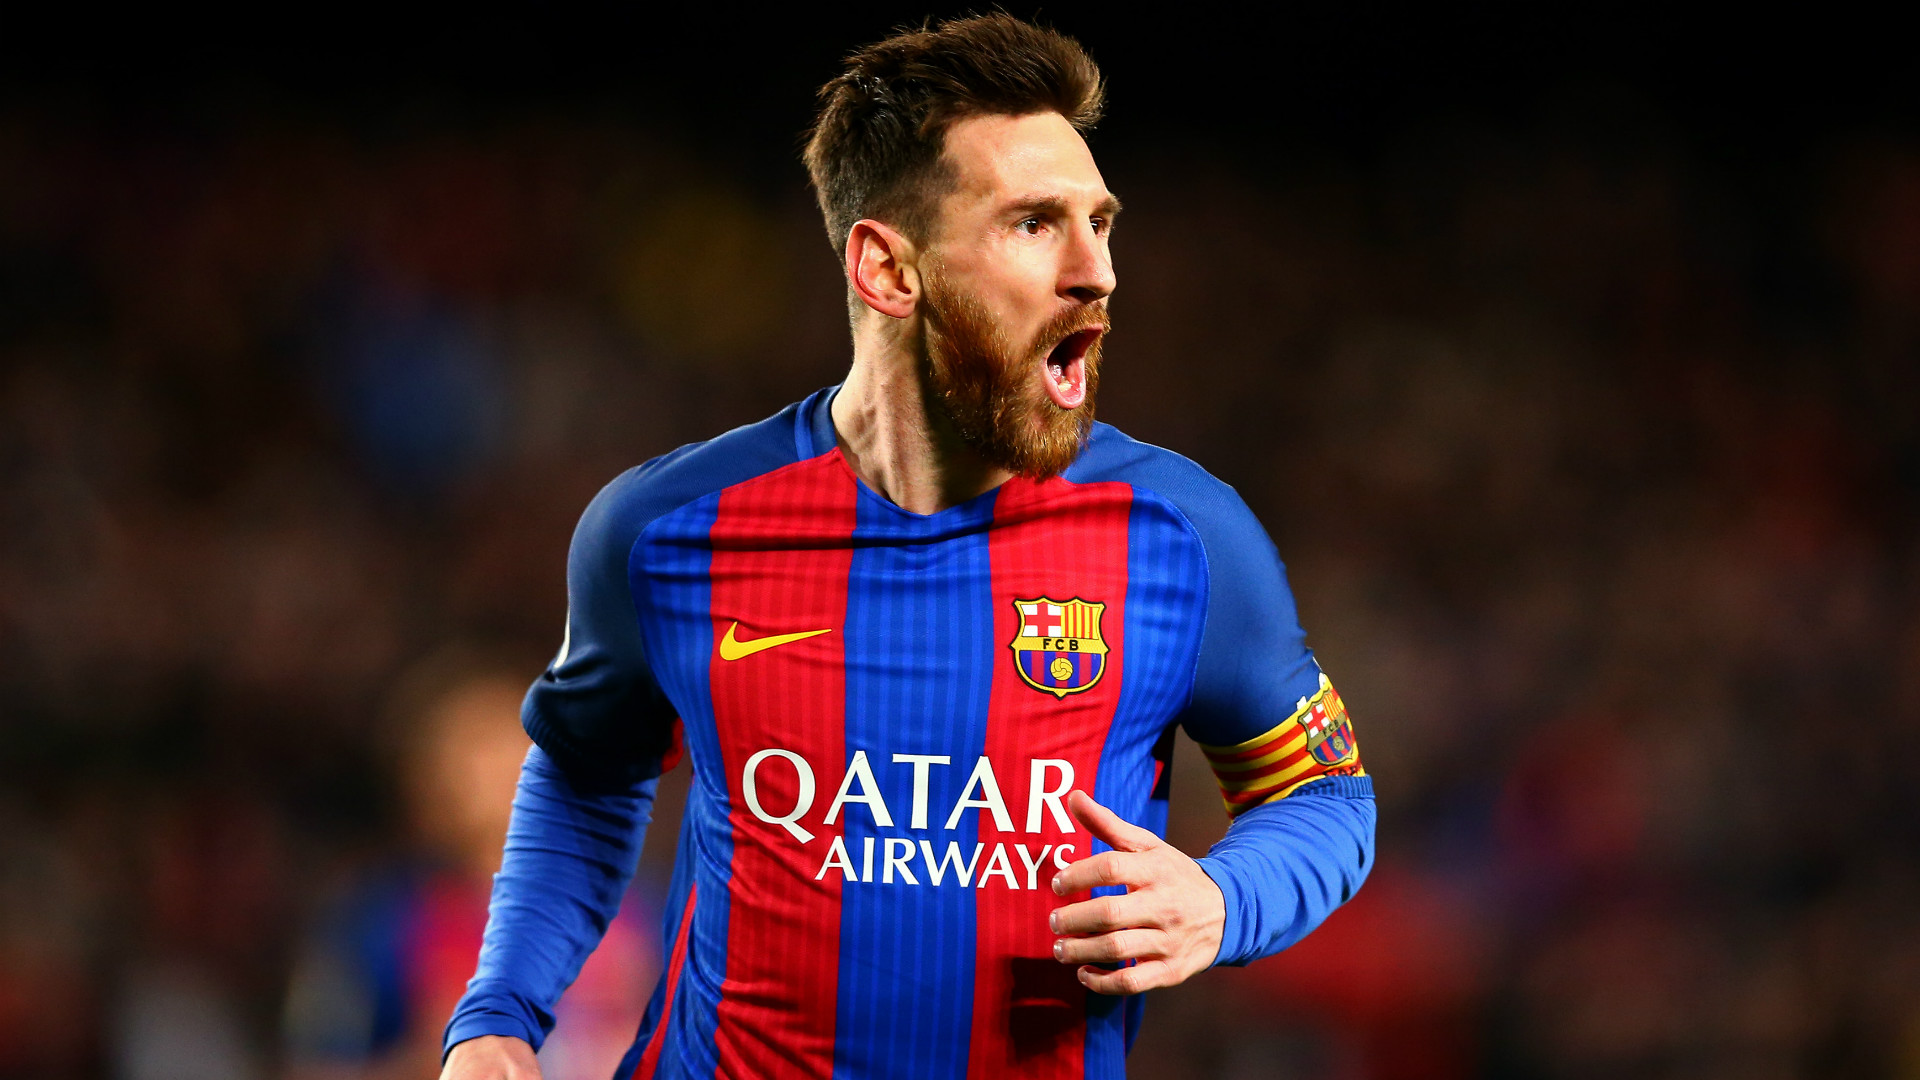  MESSI TO SIGN NEW BARCA DEAL Lionel-messi_3zemoxd9wn0z1bo2elz1frf4d